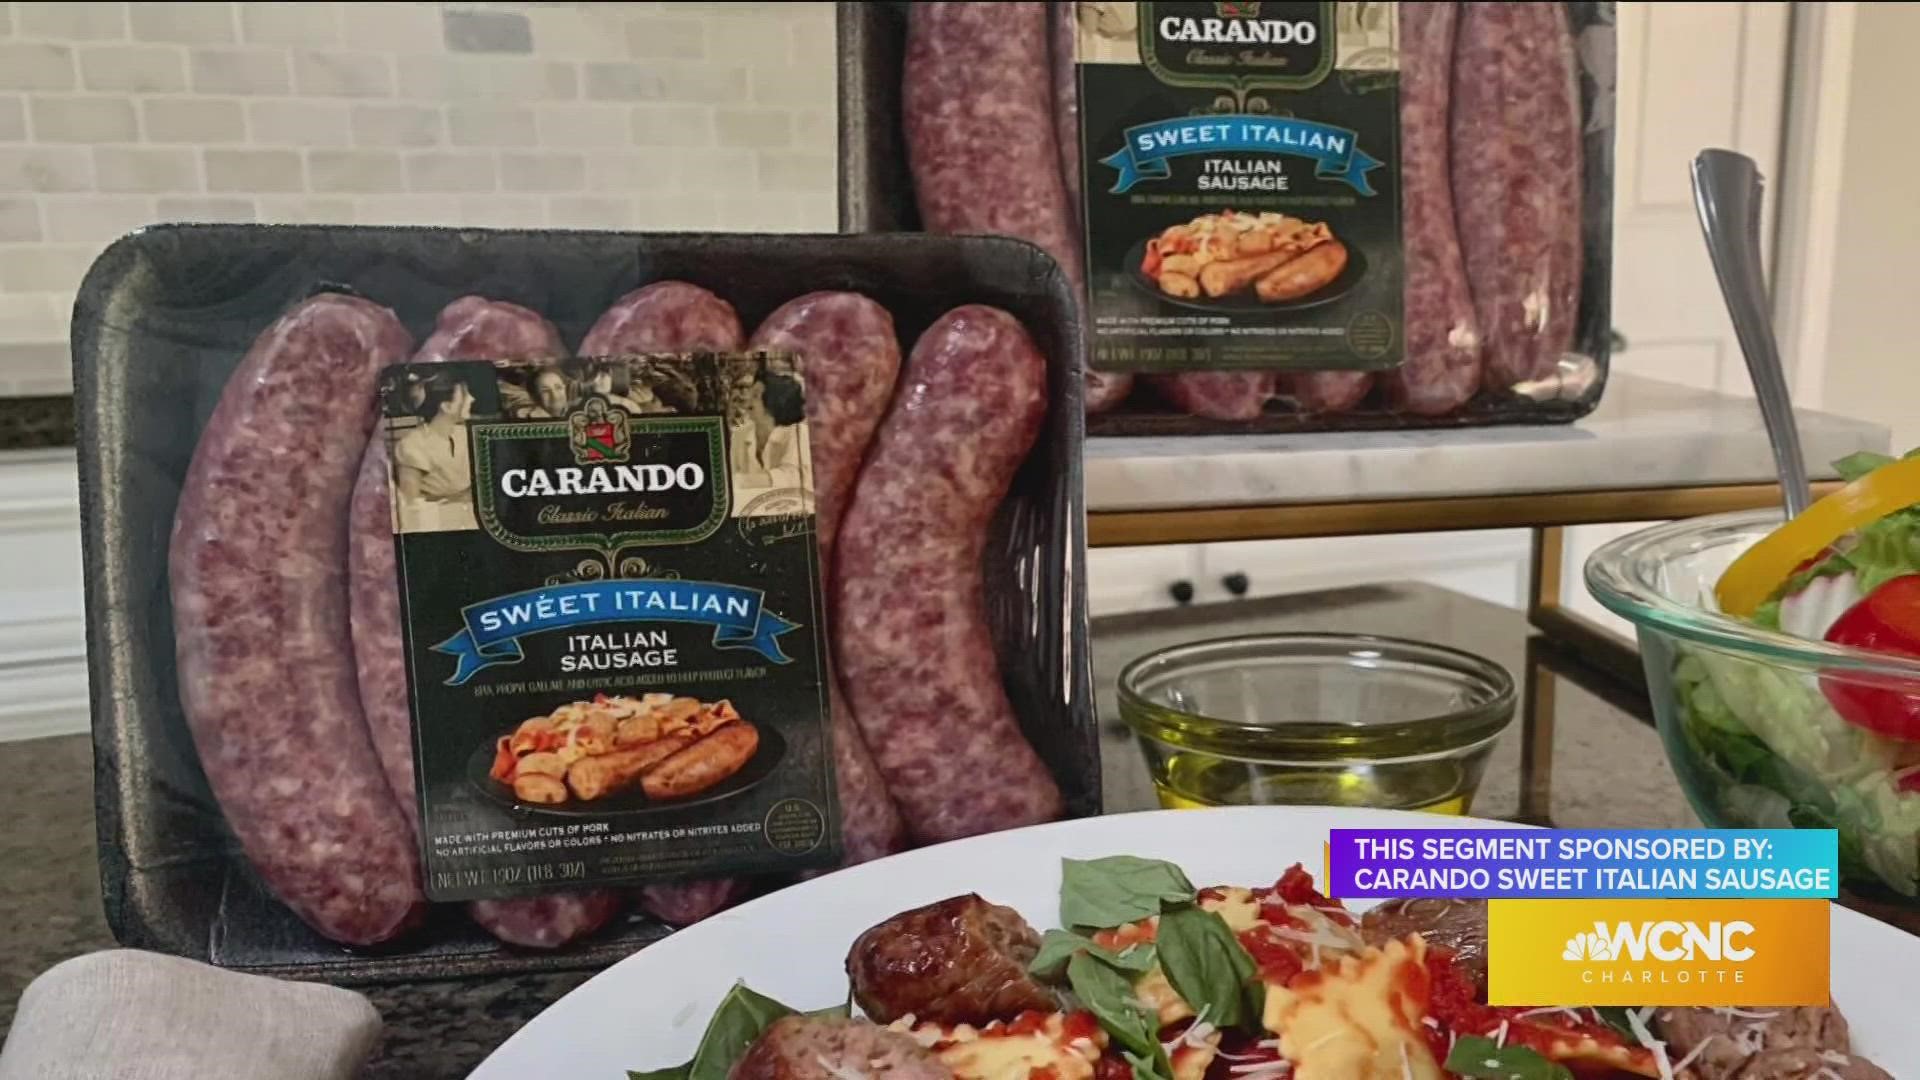 Cook up a delicious meal with Carando Sweet Italian Sausage